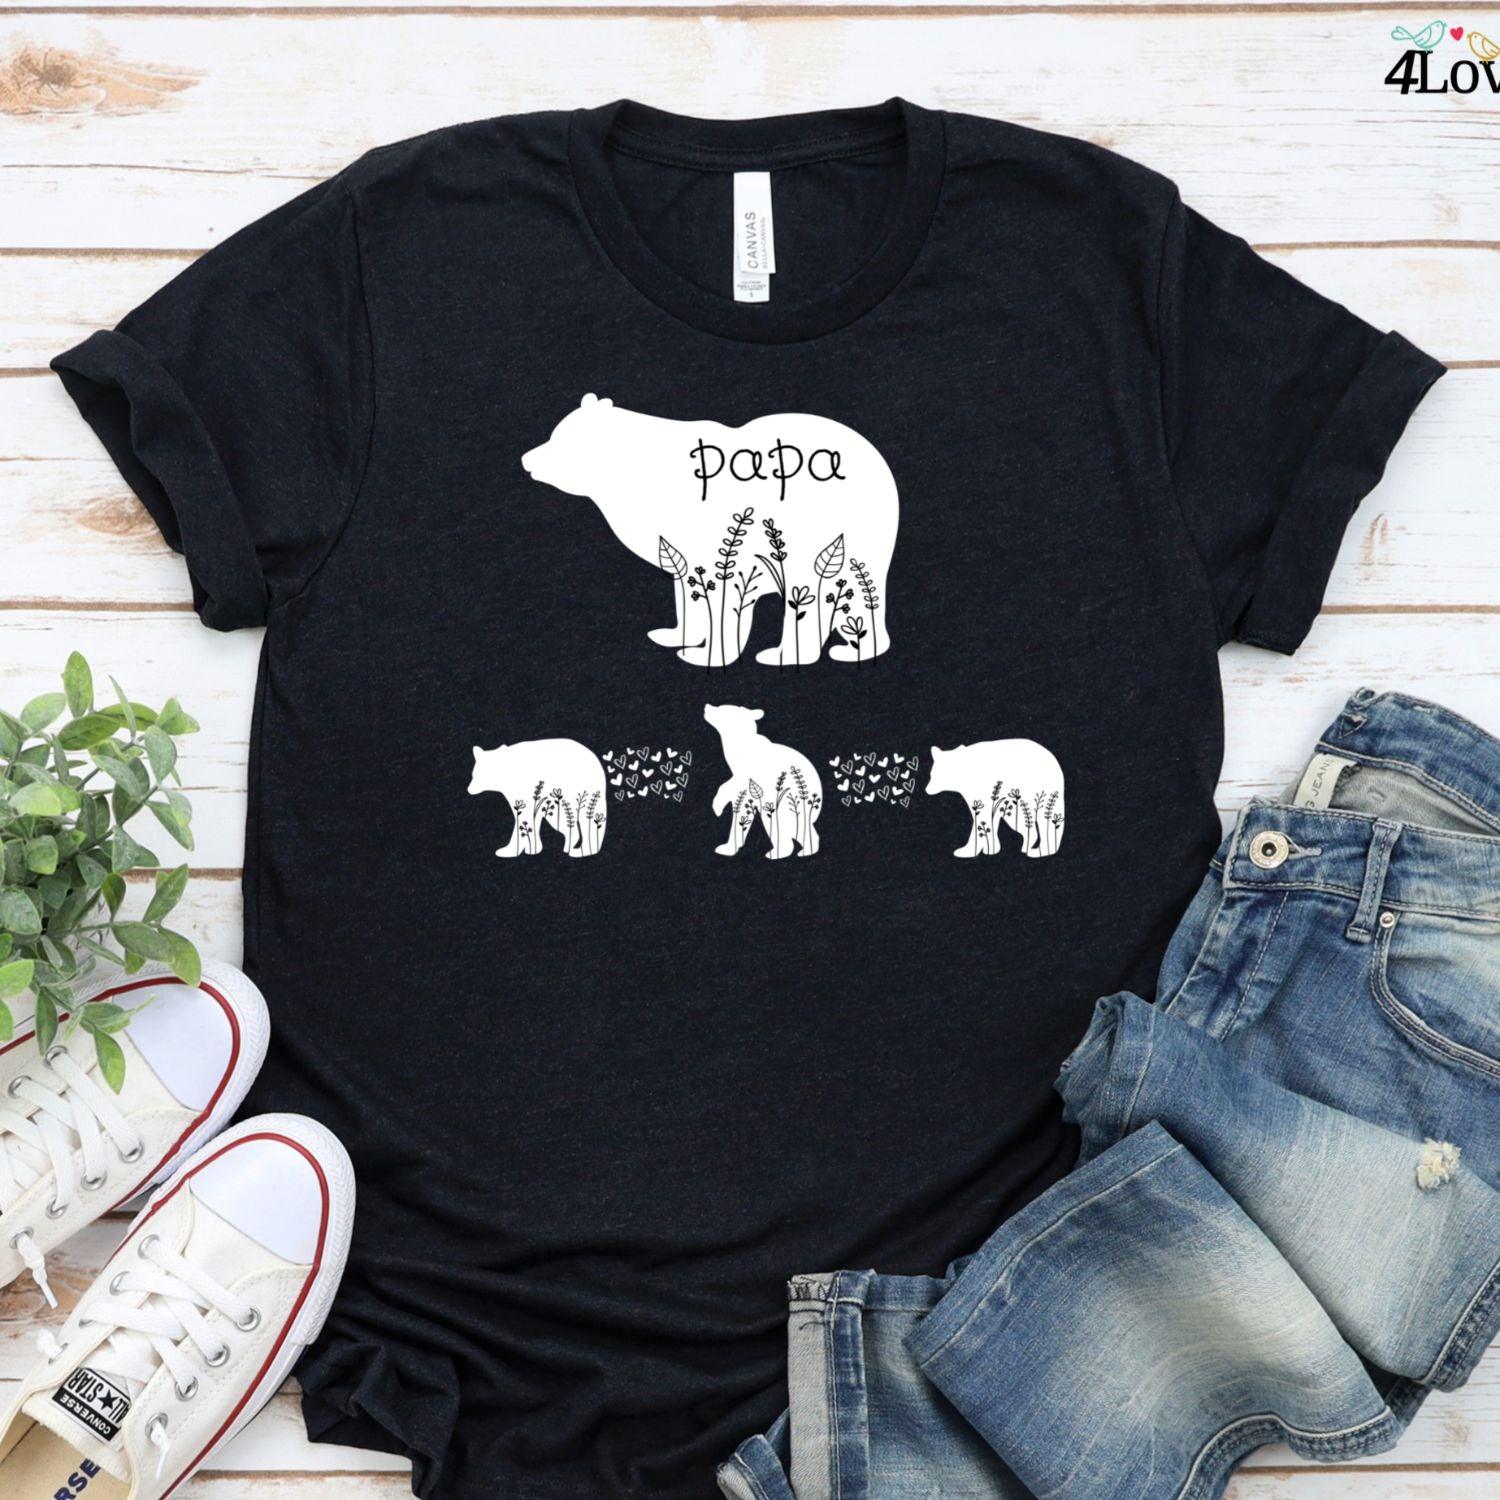 Custom Mama/Papa Bear Matching Outfits - Unique Personalized Parent Gifts - Trendy Duo Sets! - 4Lovebirds